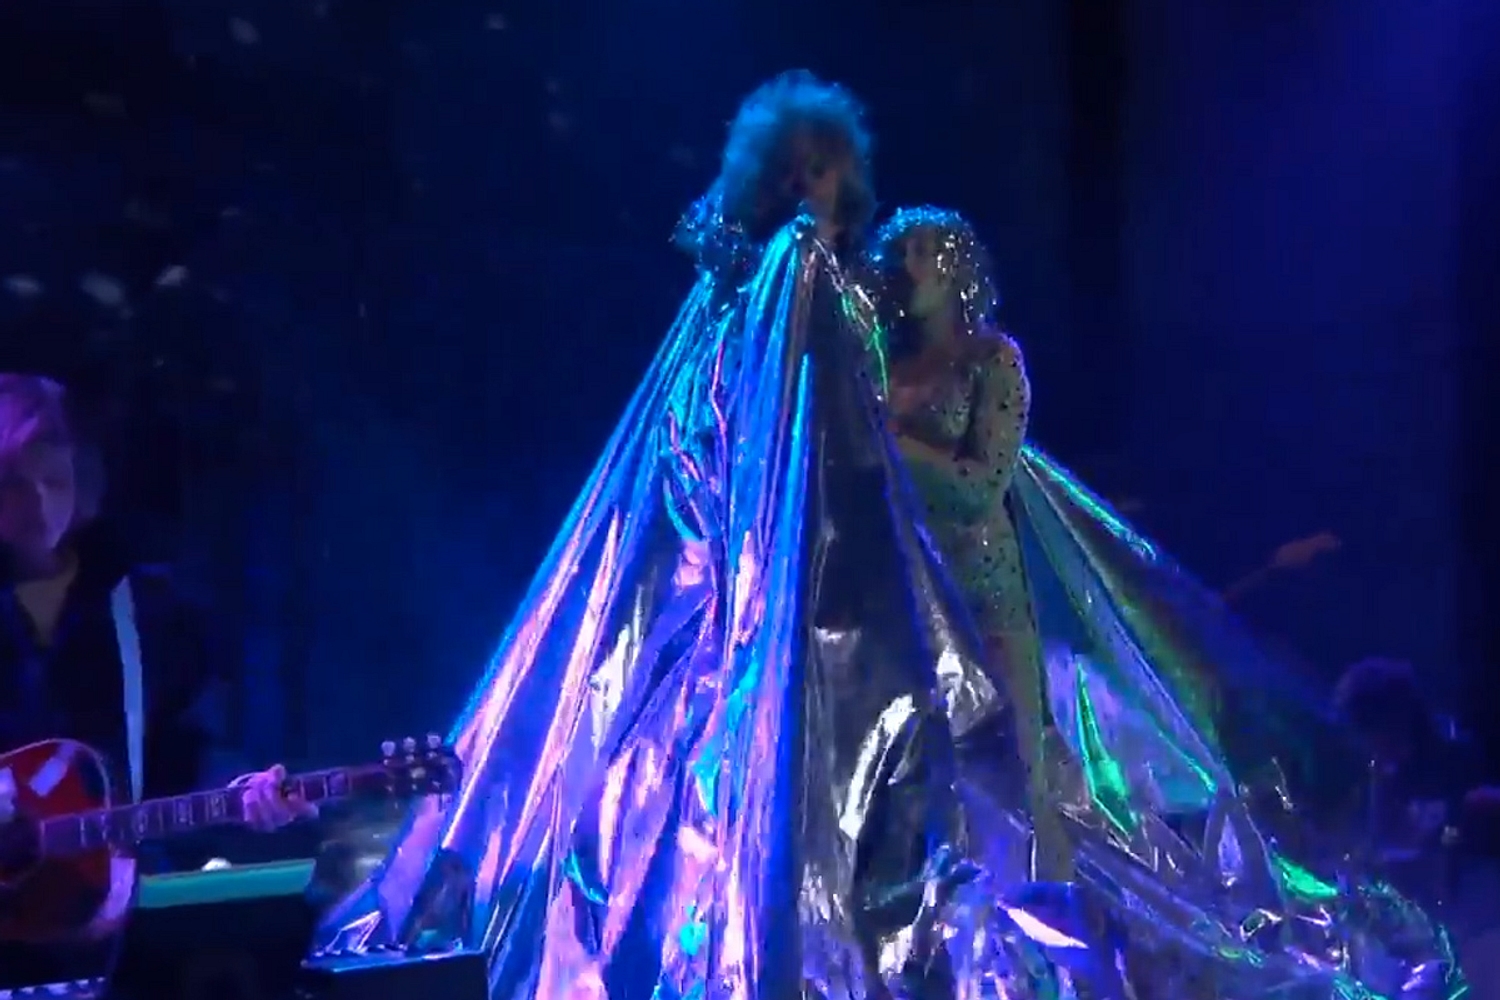 Watch The Flaming Lips and Miley Cyrus play ‘A Day In The Life’ on Conan